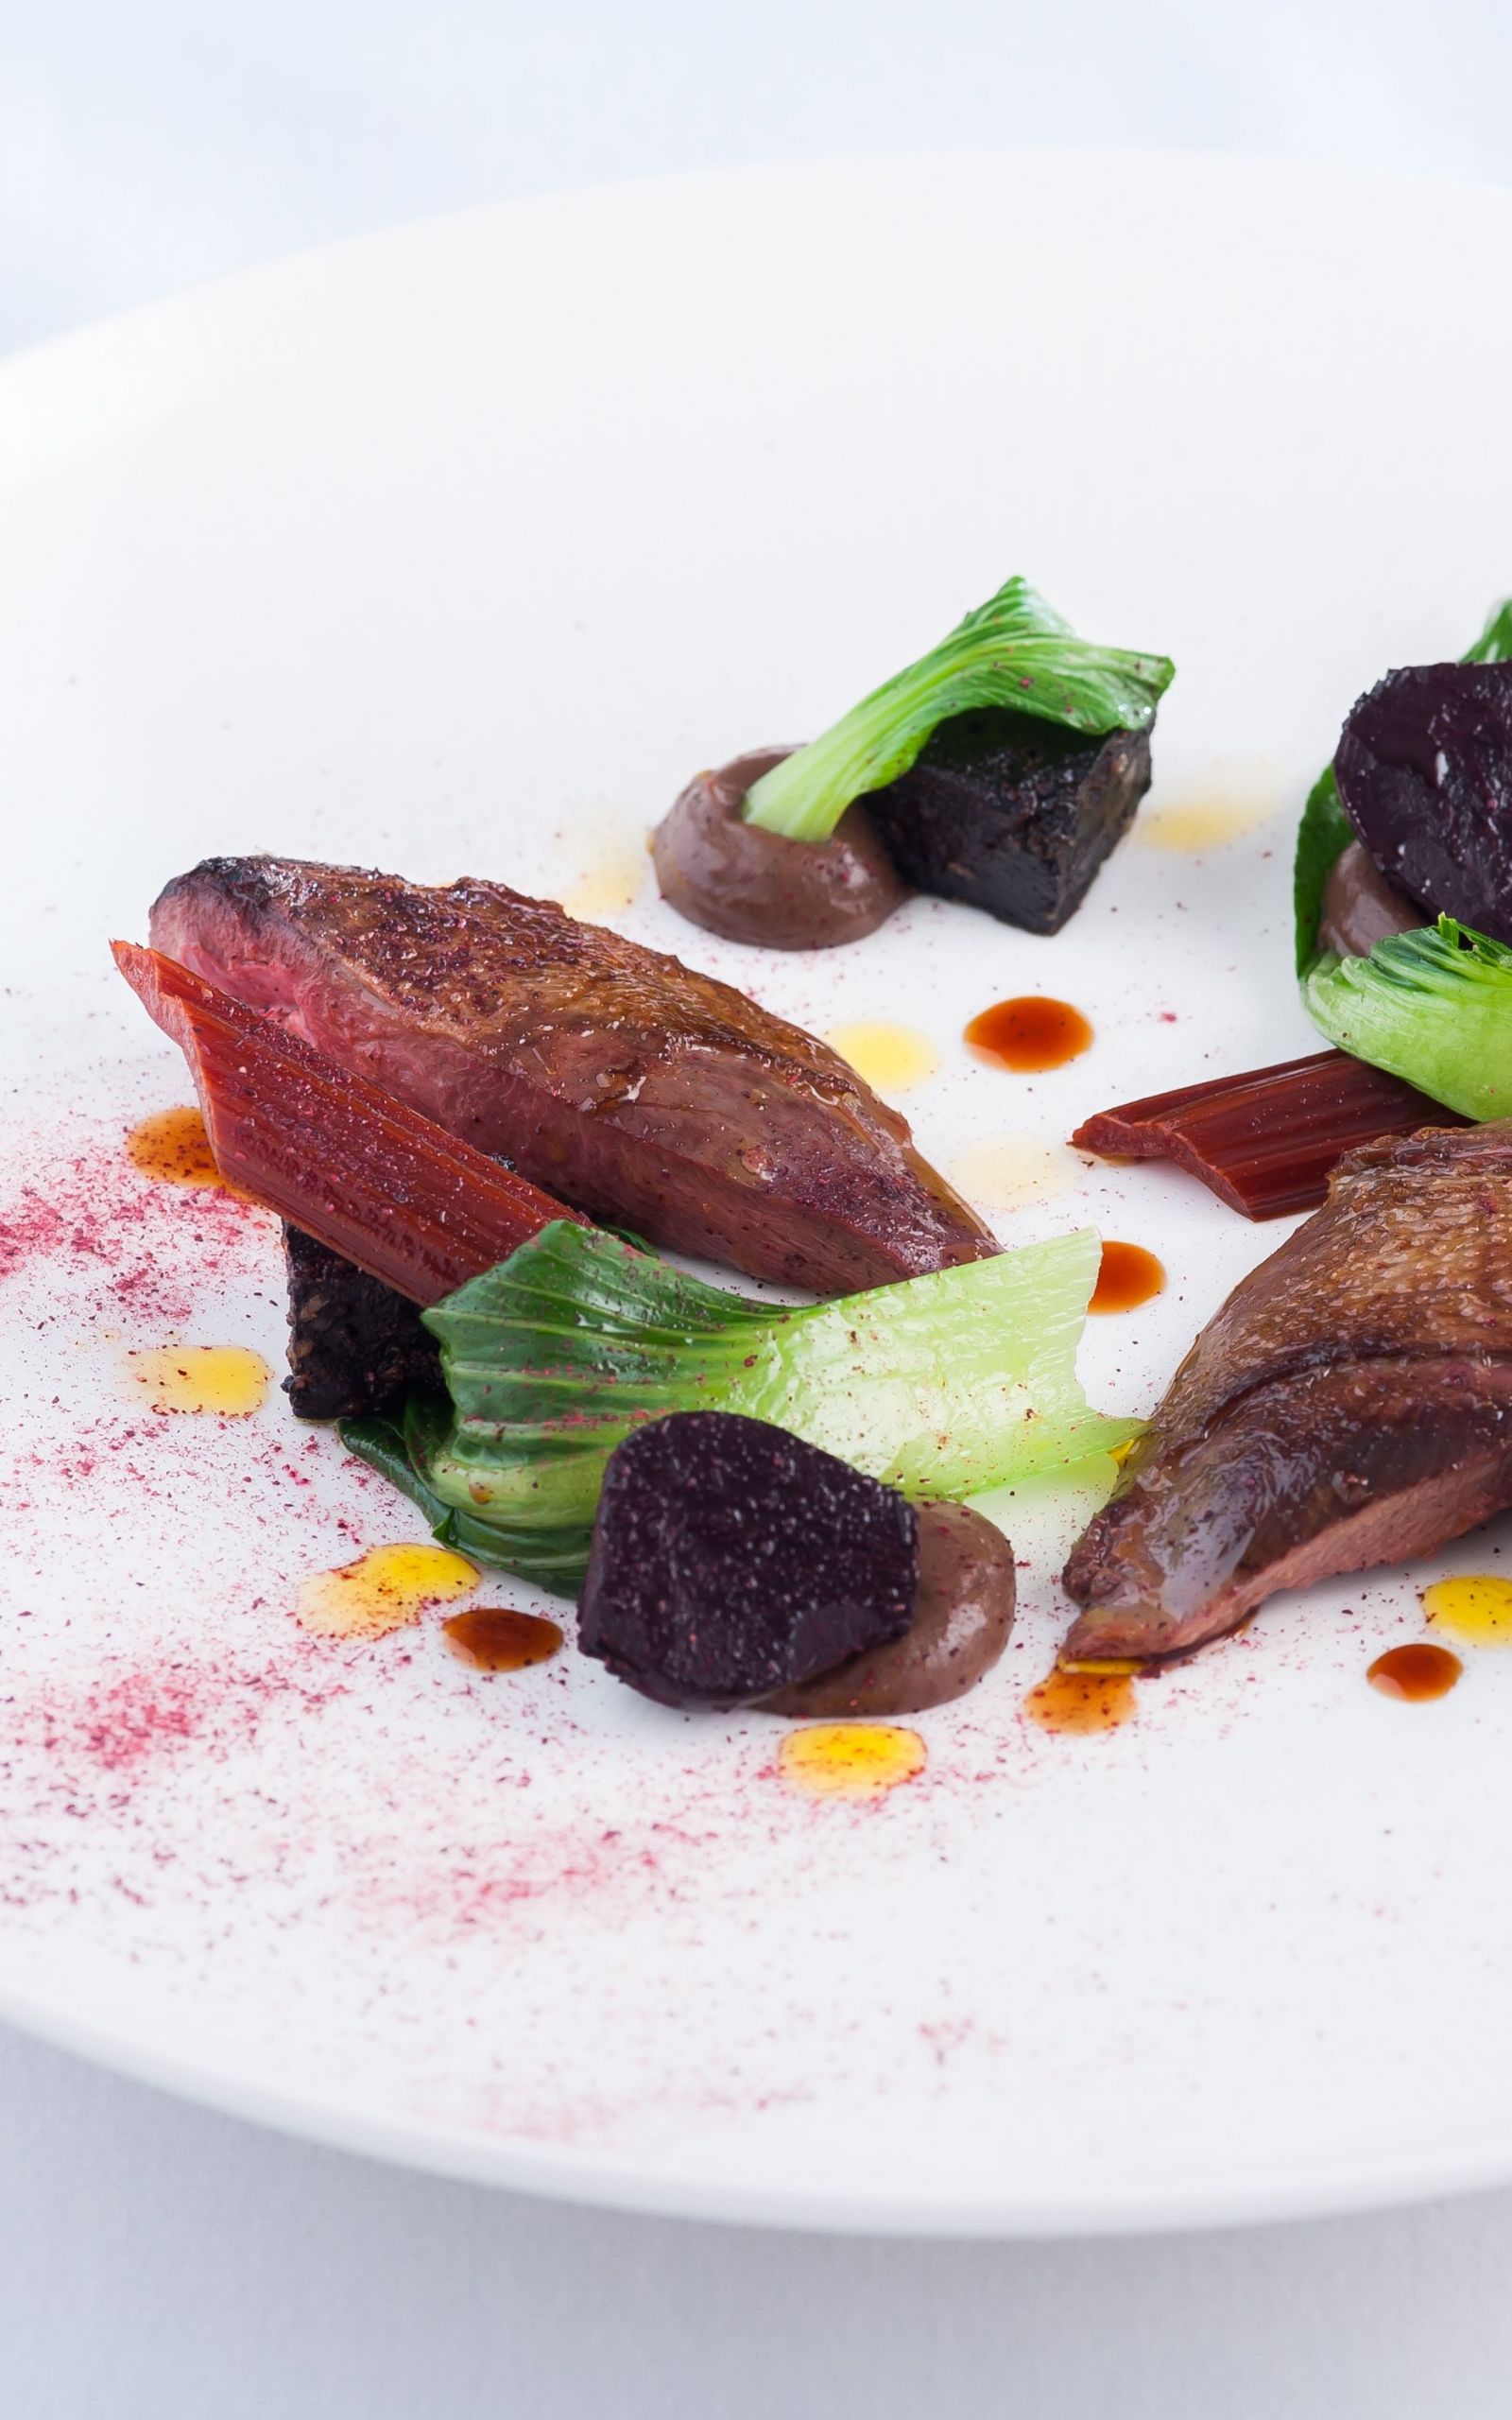 Baby Pigeon Food Recipe
 Roast wood pigeon with black pudding and baby beets